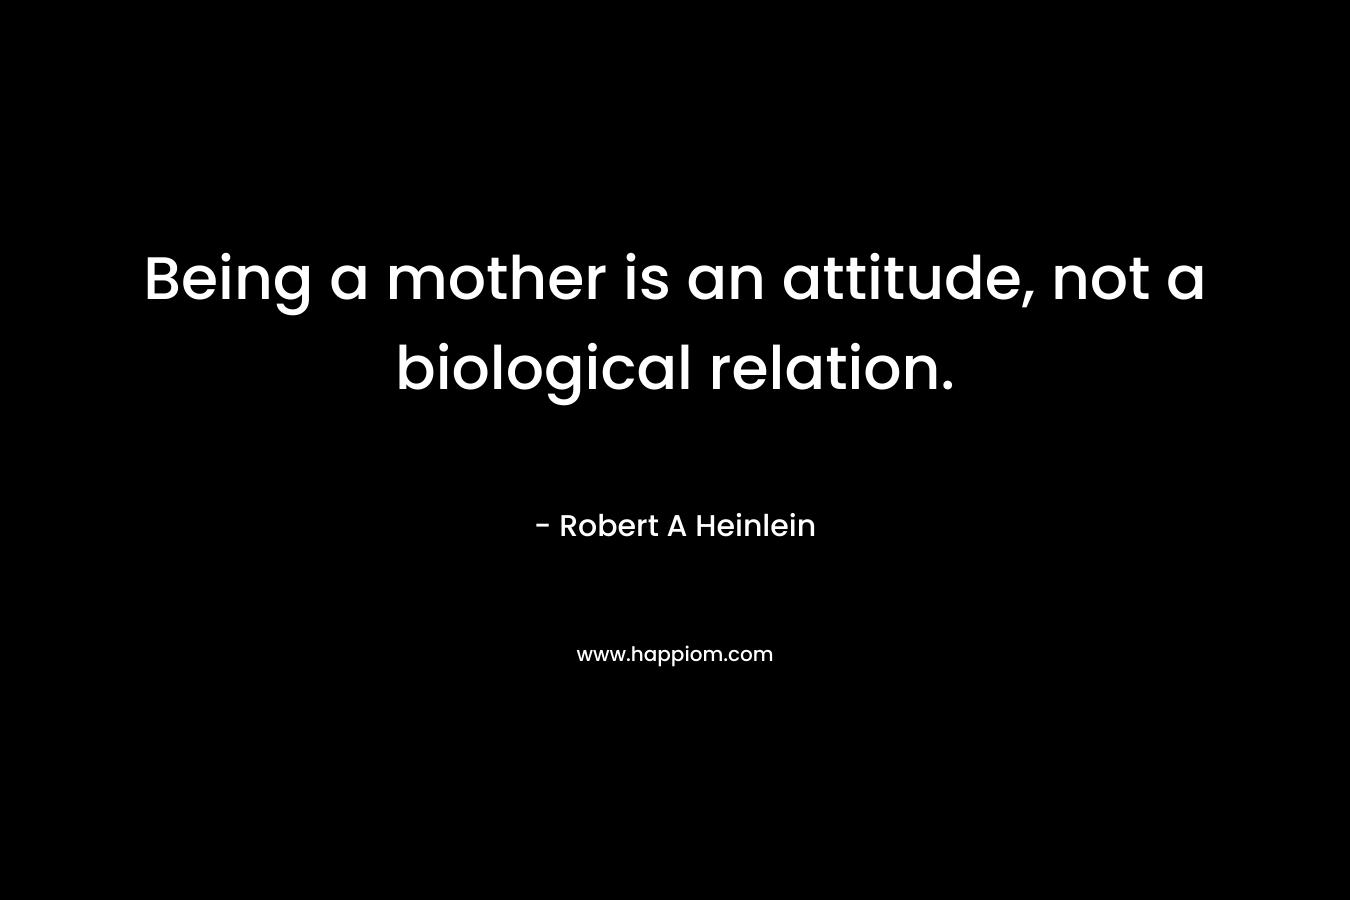 Being a mother is an attitude, not a biological relation.